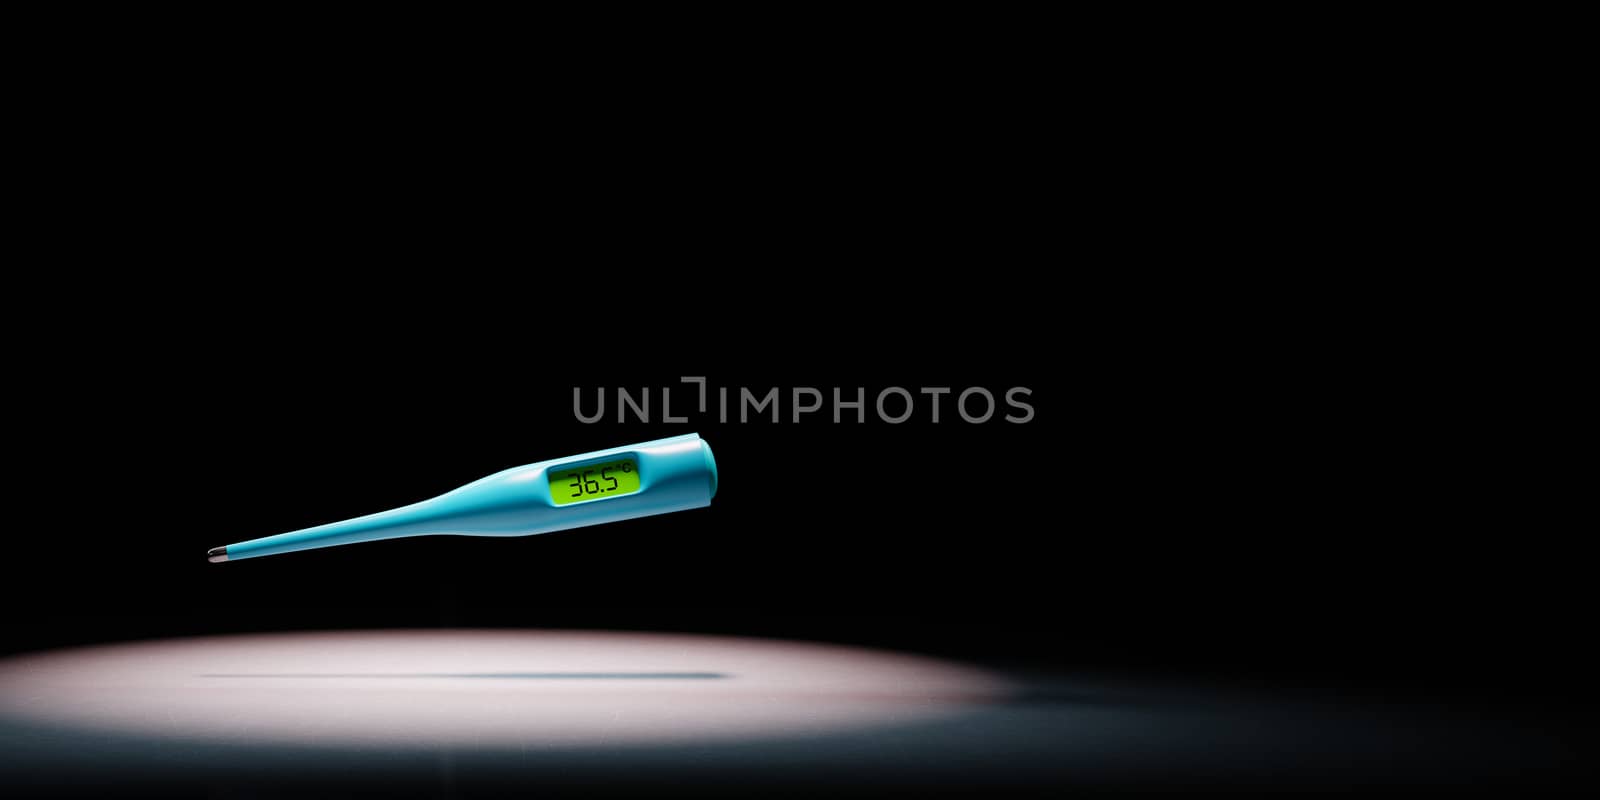 Clinical Digital Thermometer Spotlighted on Black Background with Copy Space 3D Illustration